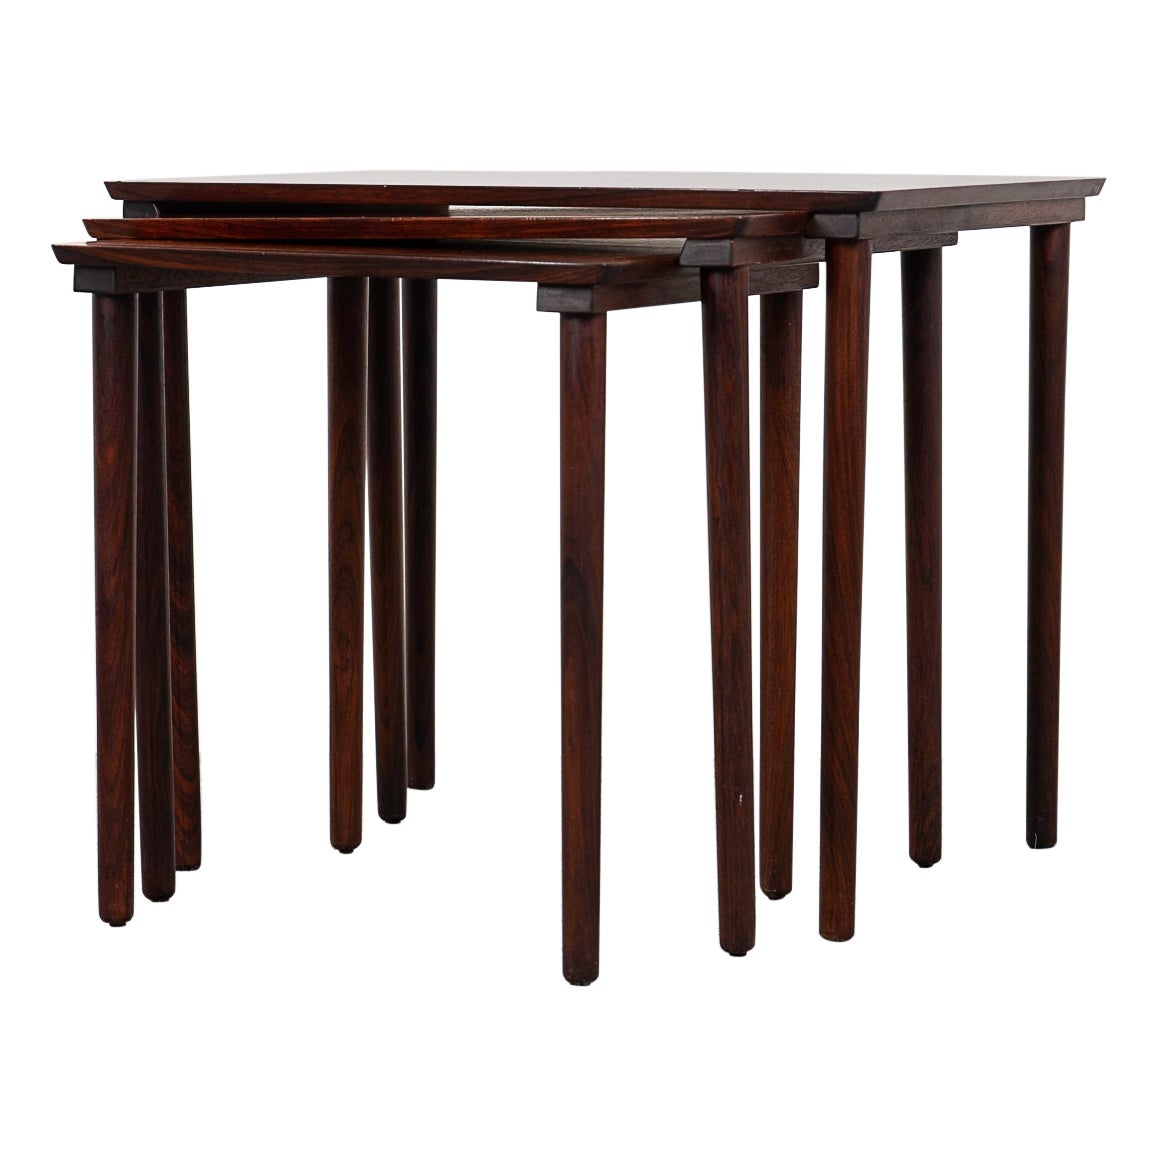 Danish Mid-Centruy Modern Rosewood Nesting Tables by Mobelintarsia For Sale